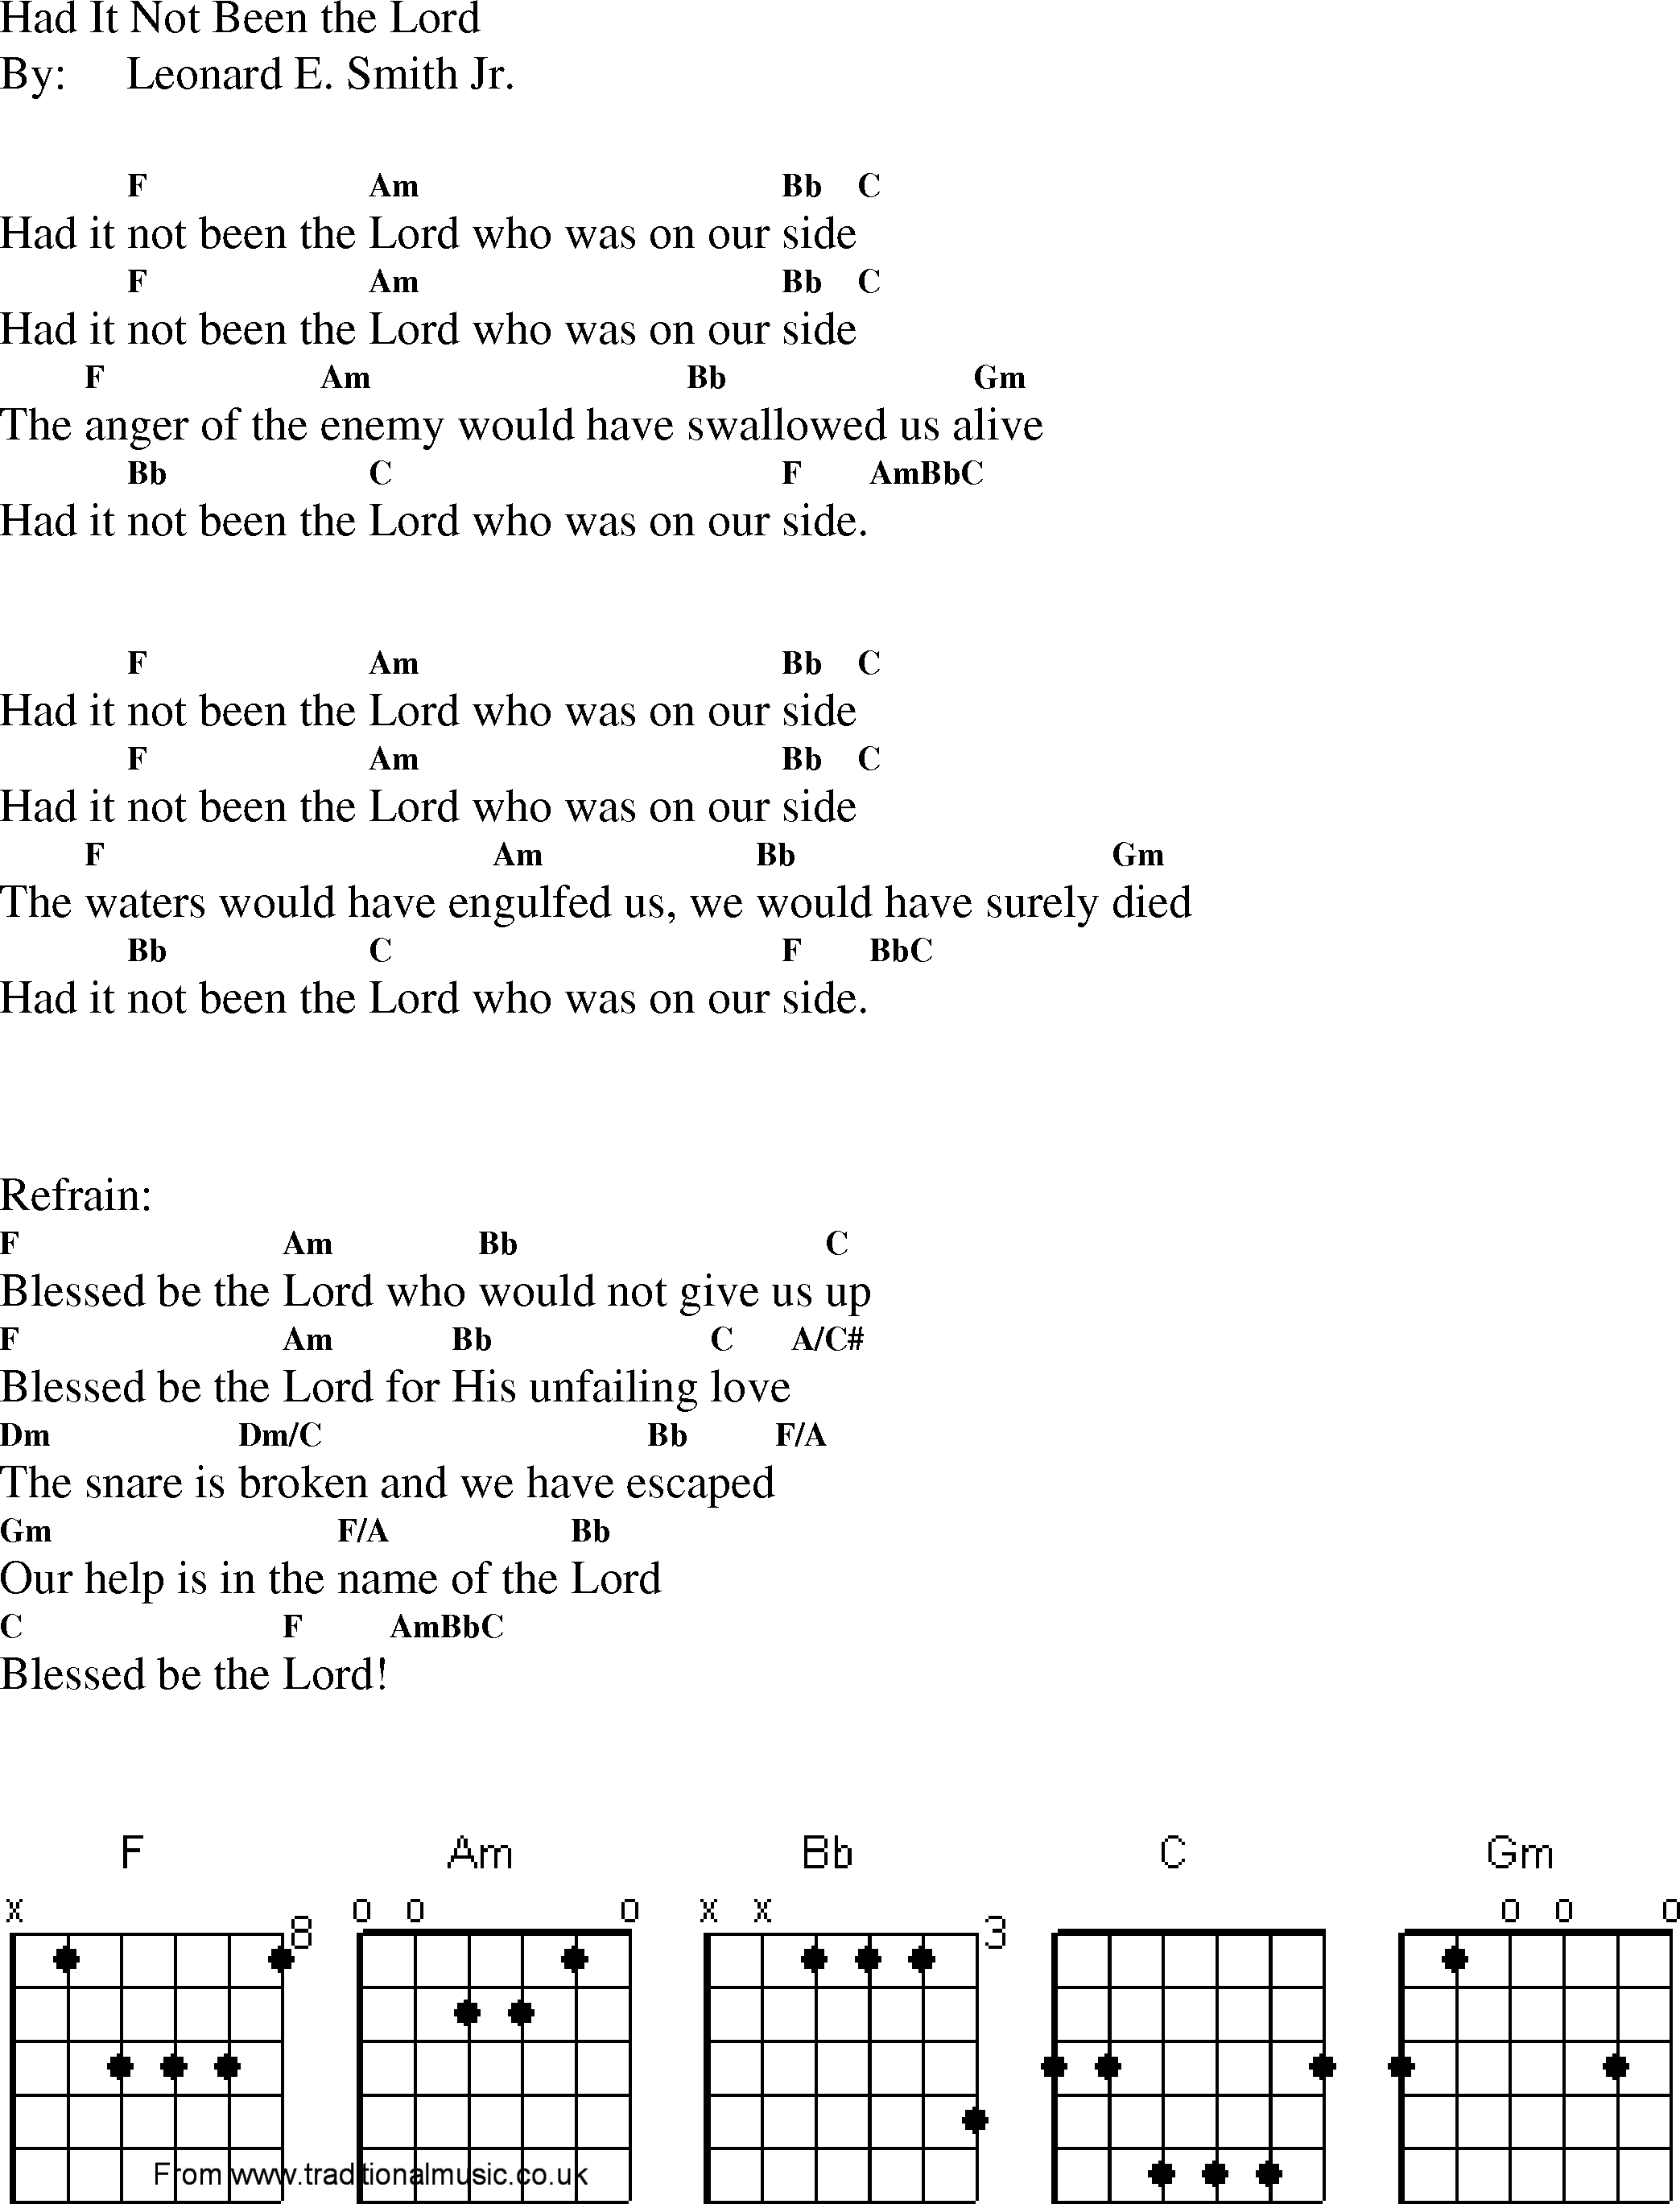 Gospel Song: had_it_not_been_the_lord, lyrics and chords.